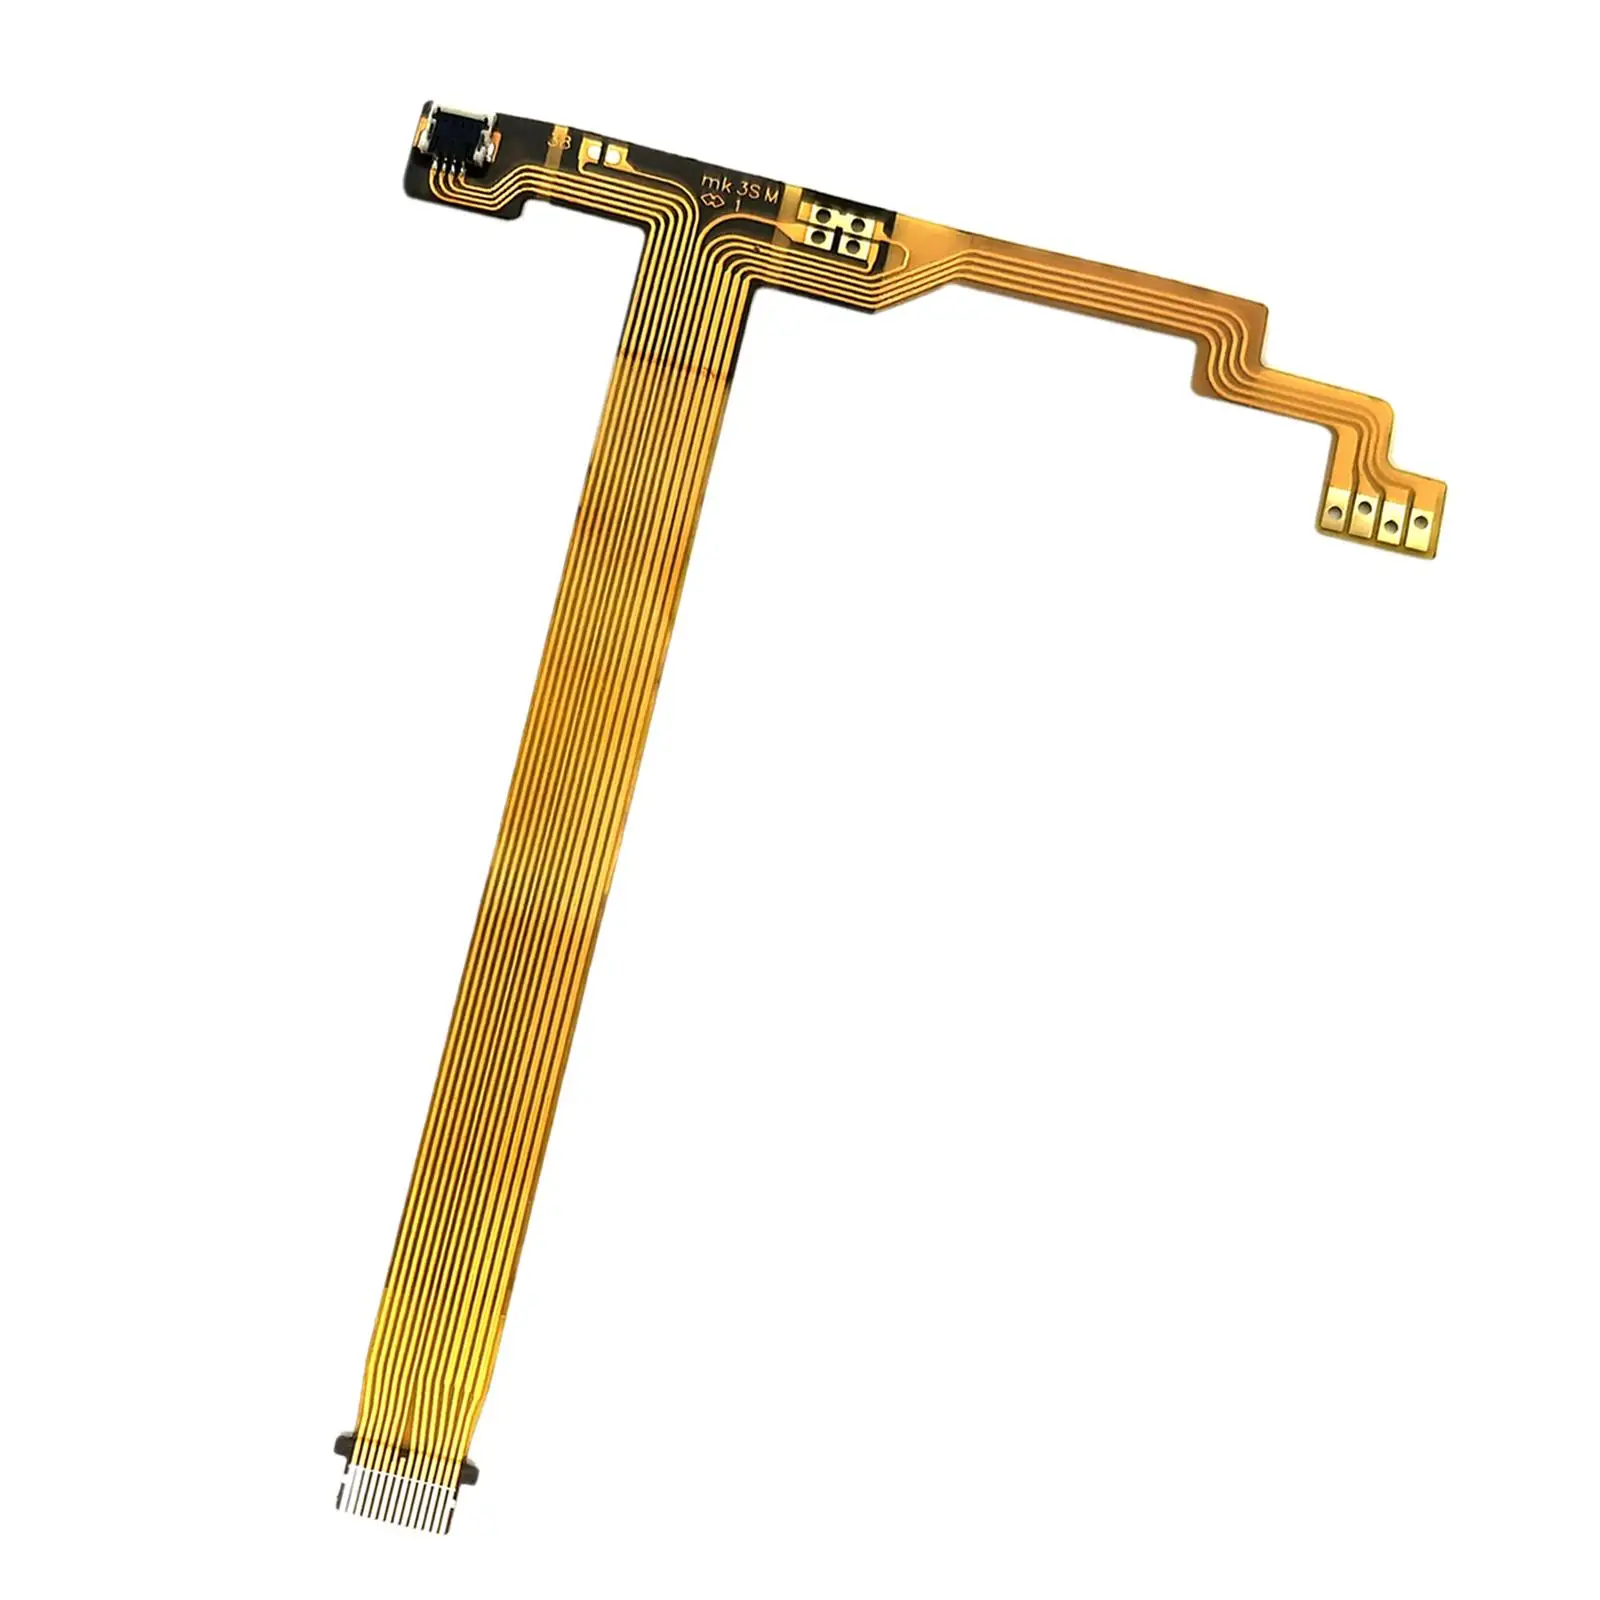 High Quality Lens Focus Flex Cable Module with Interface for Af-P DX 18-55mm Electronic Components